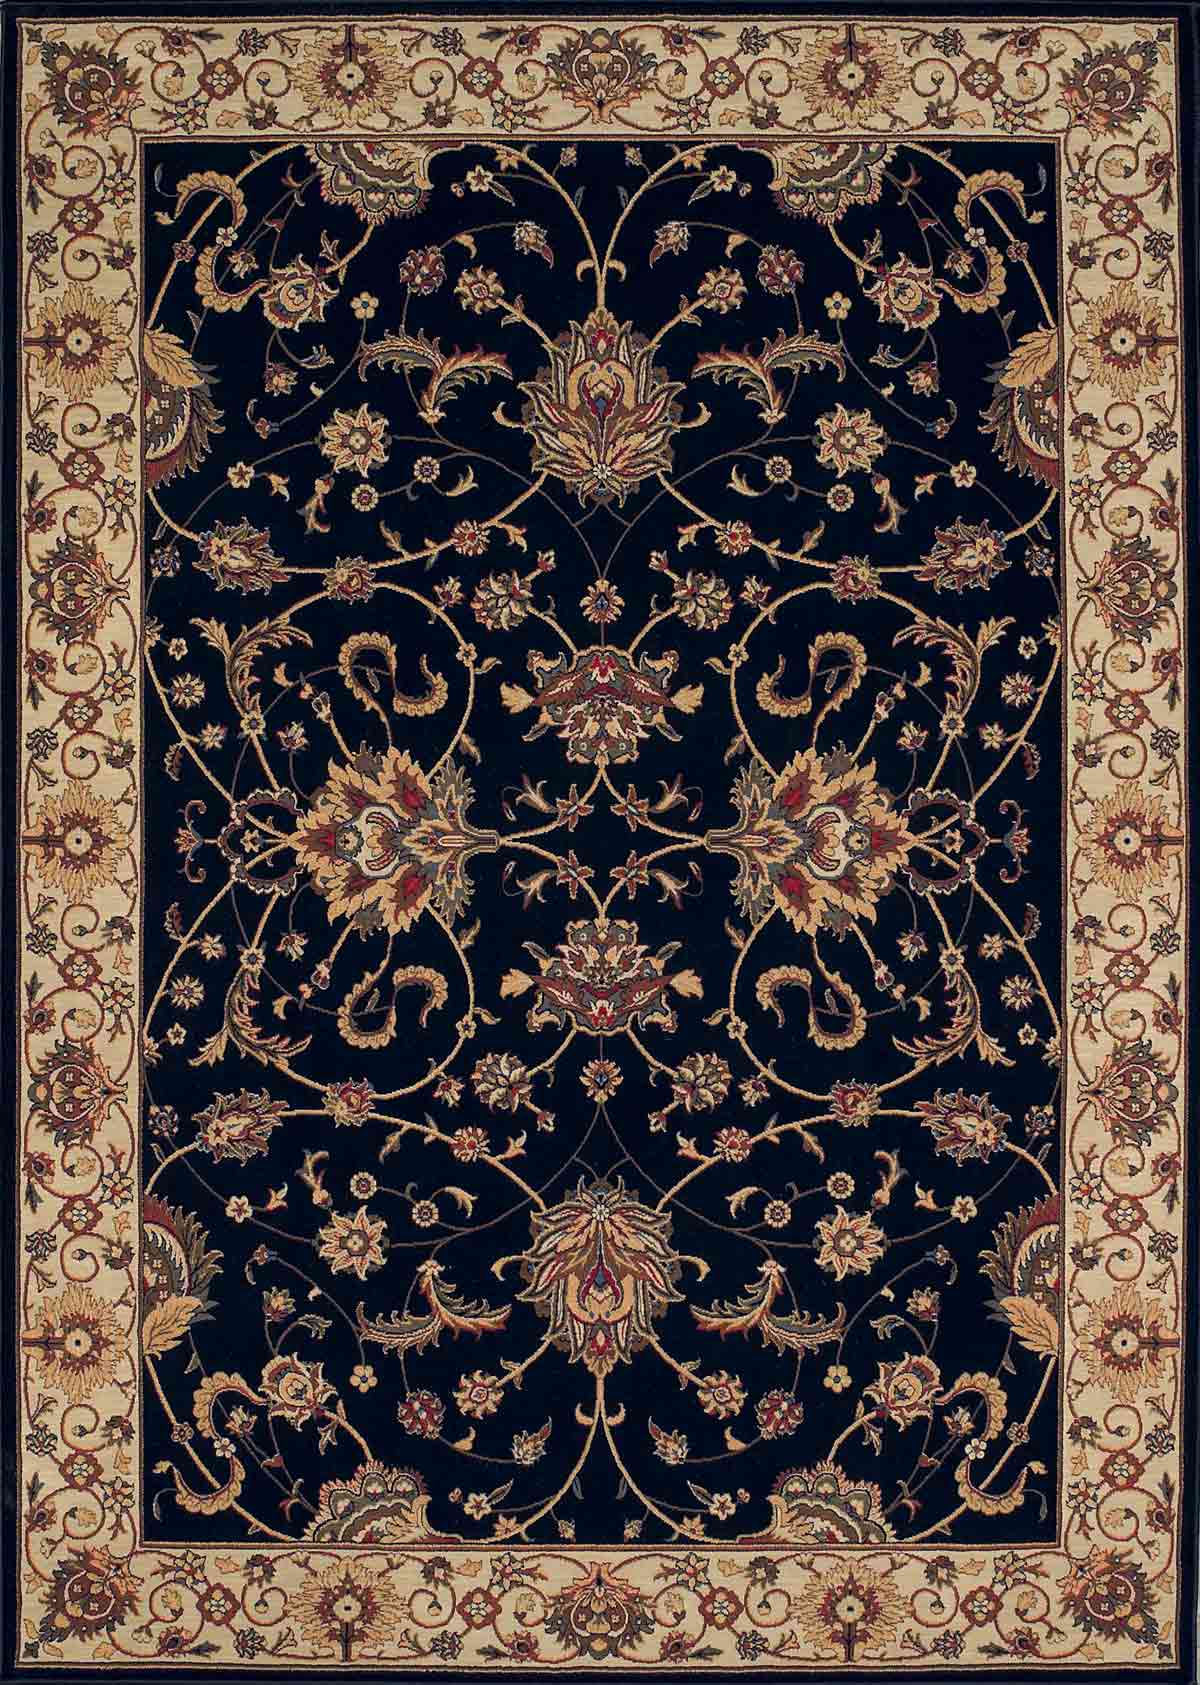 Dalyn Rug Company Dalyn Imperial Area Rugs - IP81 Traditional Oriental Burgundy Persian Patchwork Bordered Paisley Rug